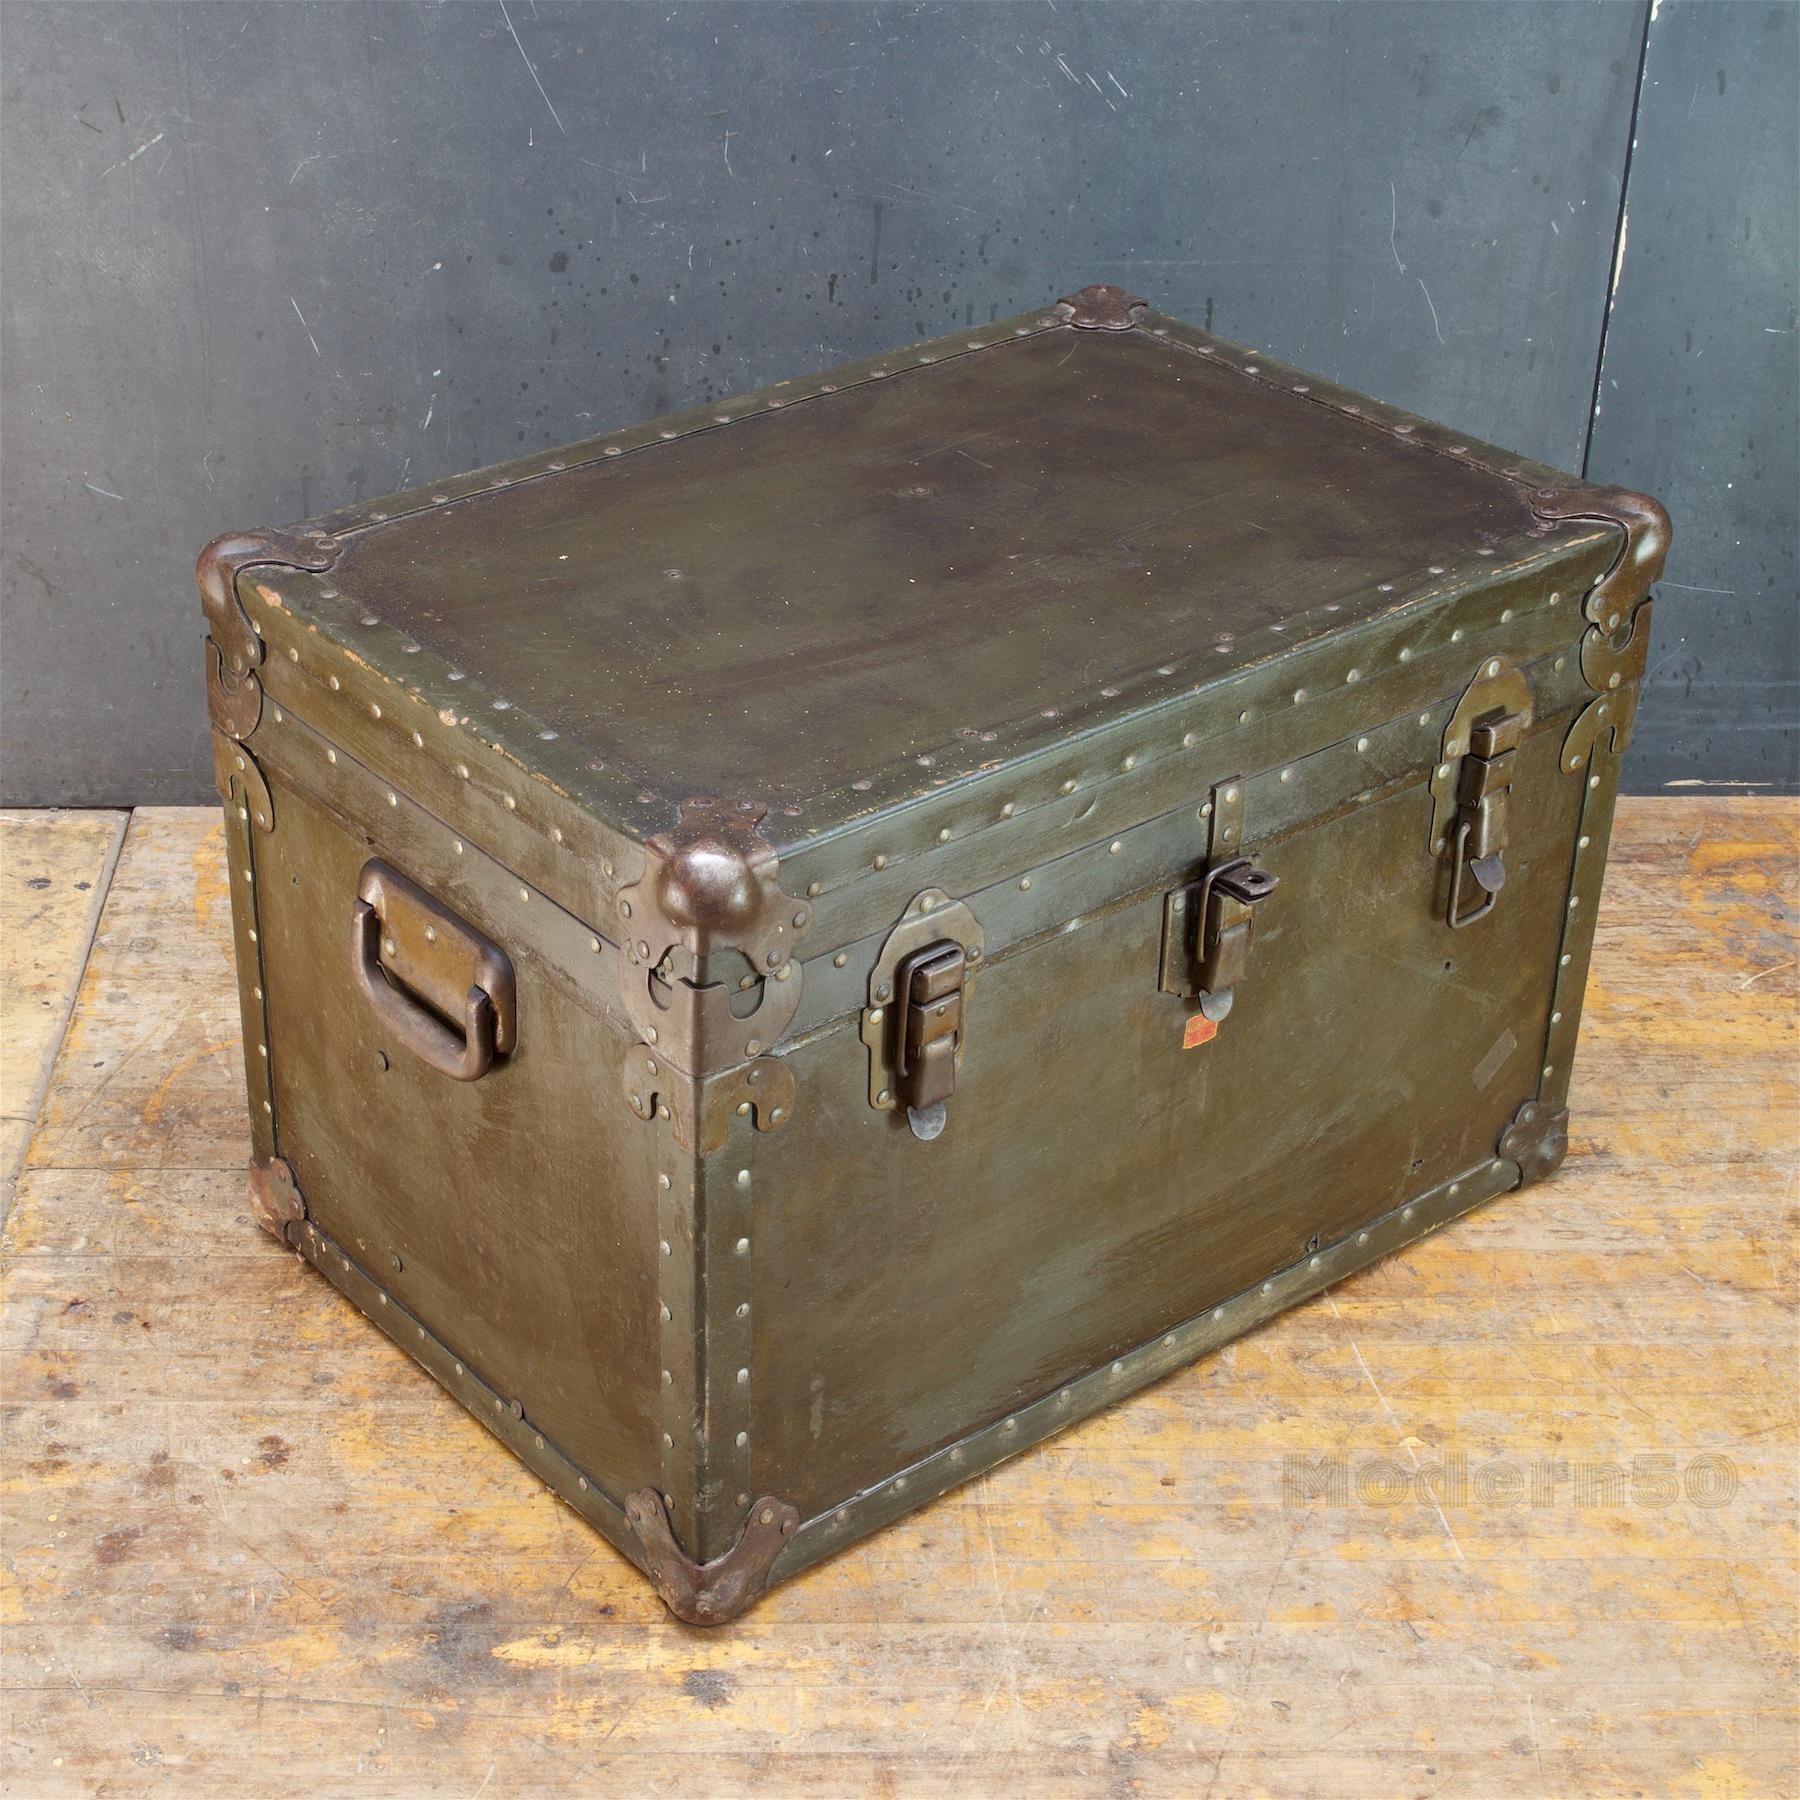 Vulcanized Fiber Trunk with history and presence, fully functional, just a padlock needed to be lockable. A wonderful decorative interior storage table or prop. 